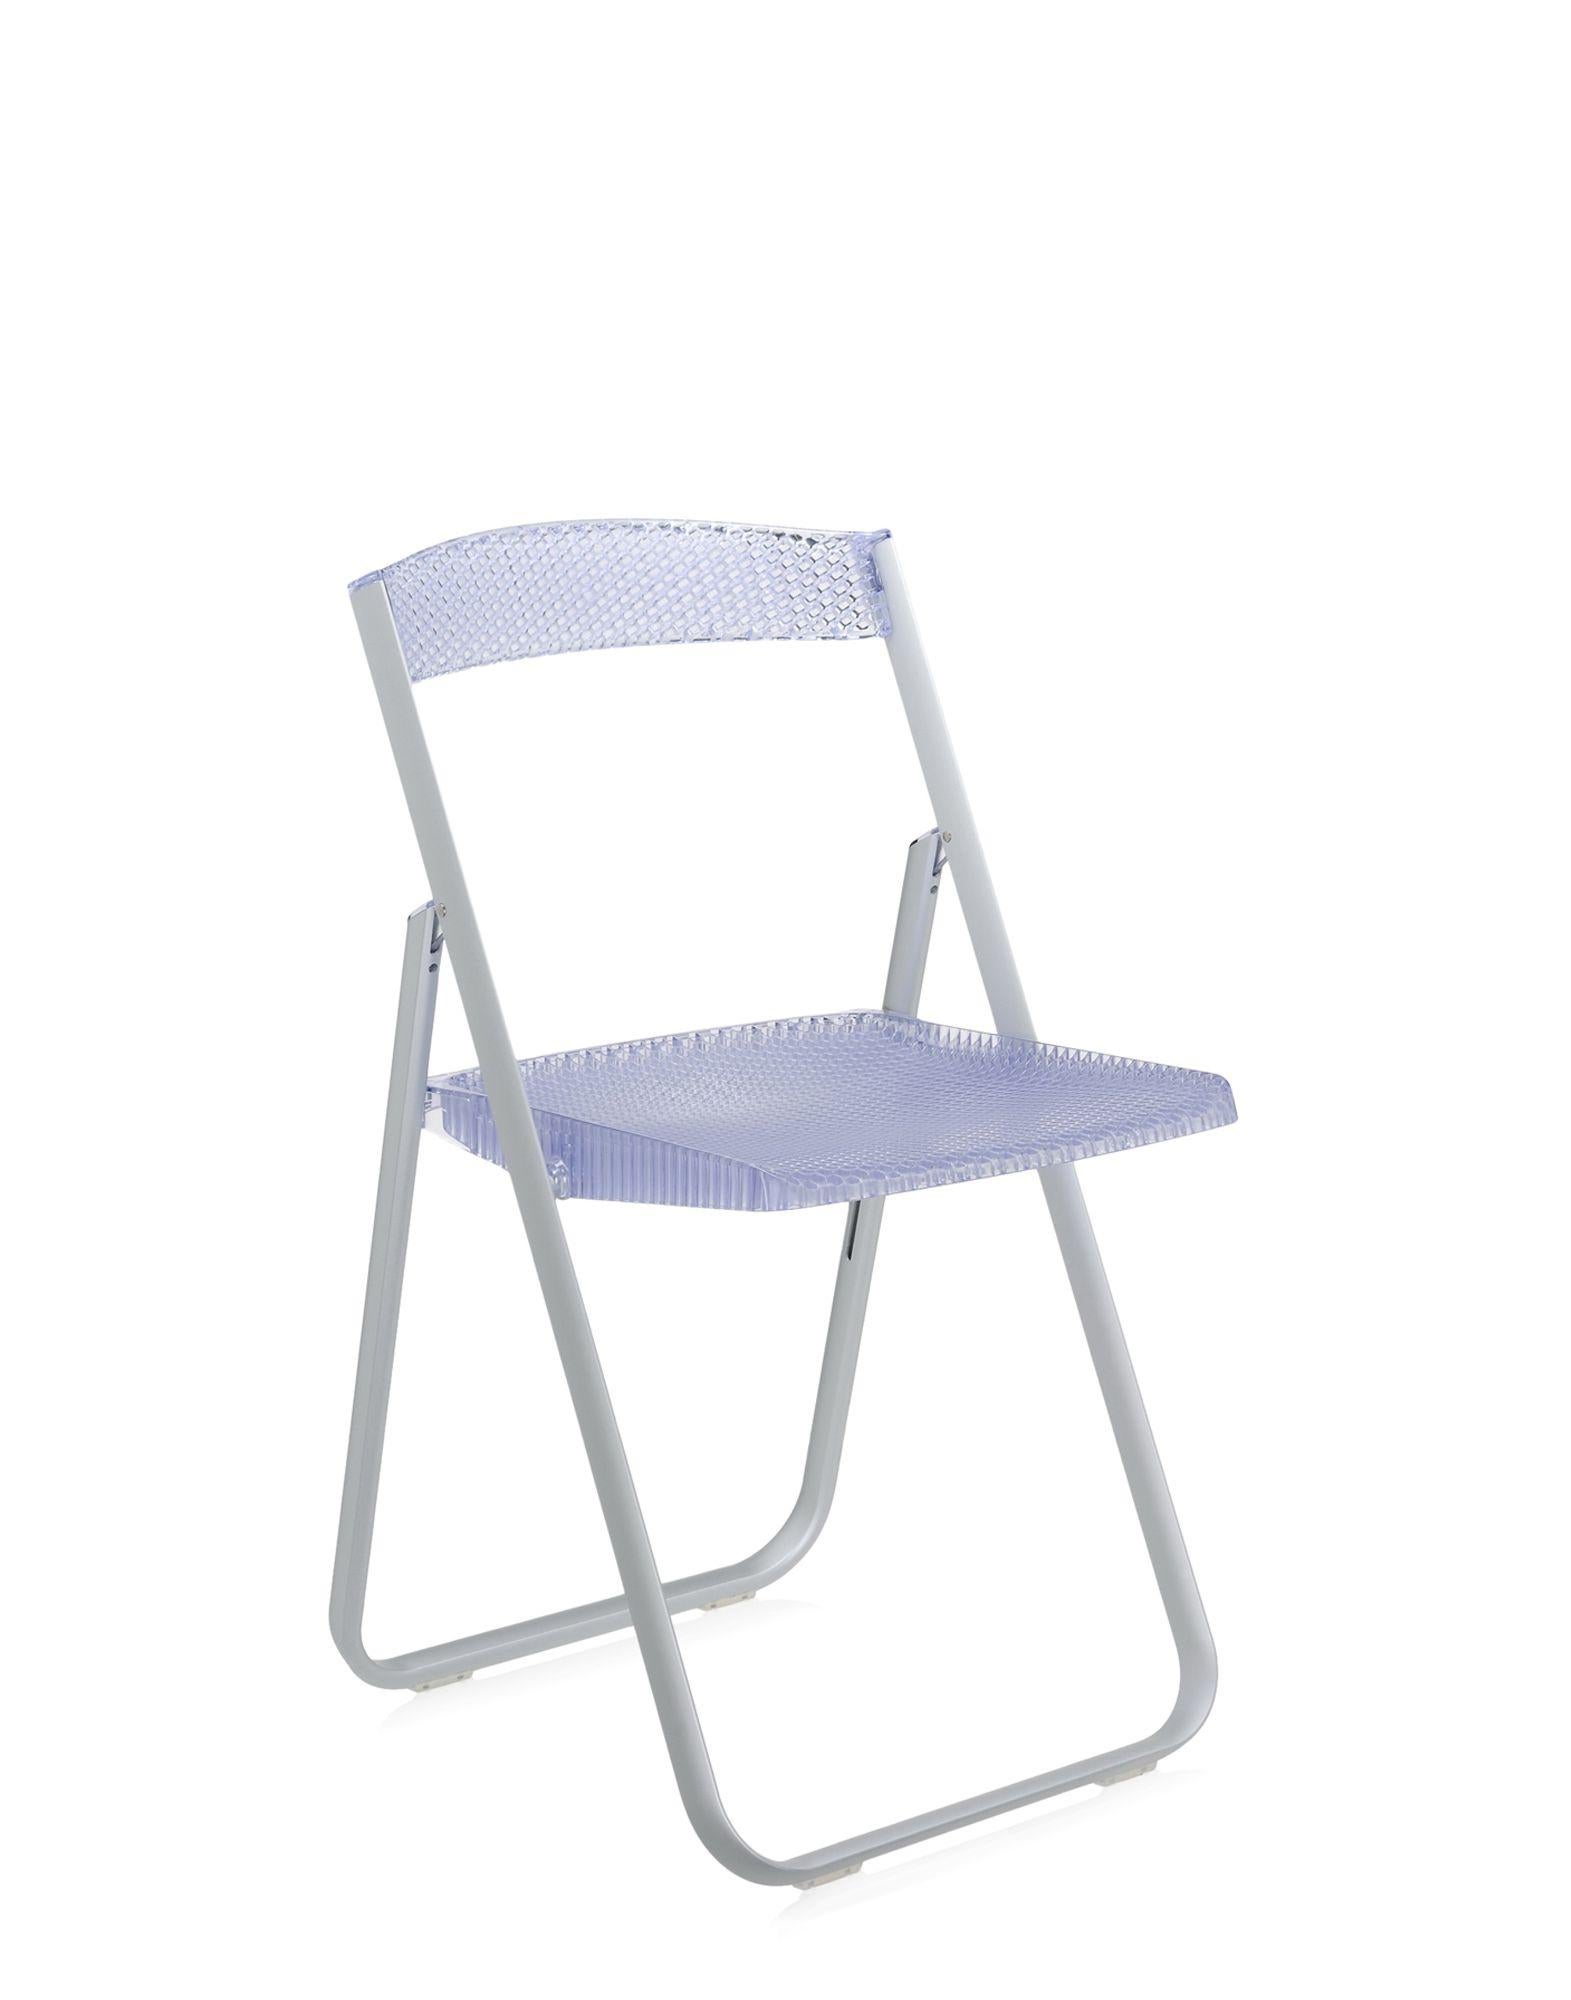 Honeycomb is a light and easy-to-use versatile folding chair. It has an aluminium frame, while its backrest and seat are made of transparent or mass-tinted polycarbonate. The refinement of the structured texturing, divided into hexagonal honeycomb